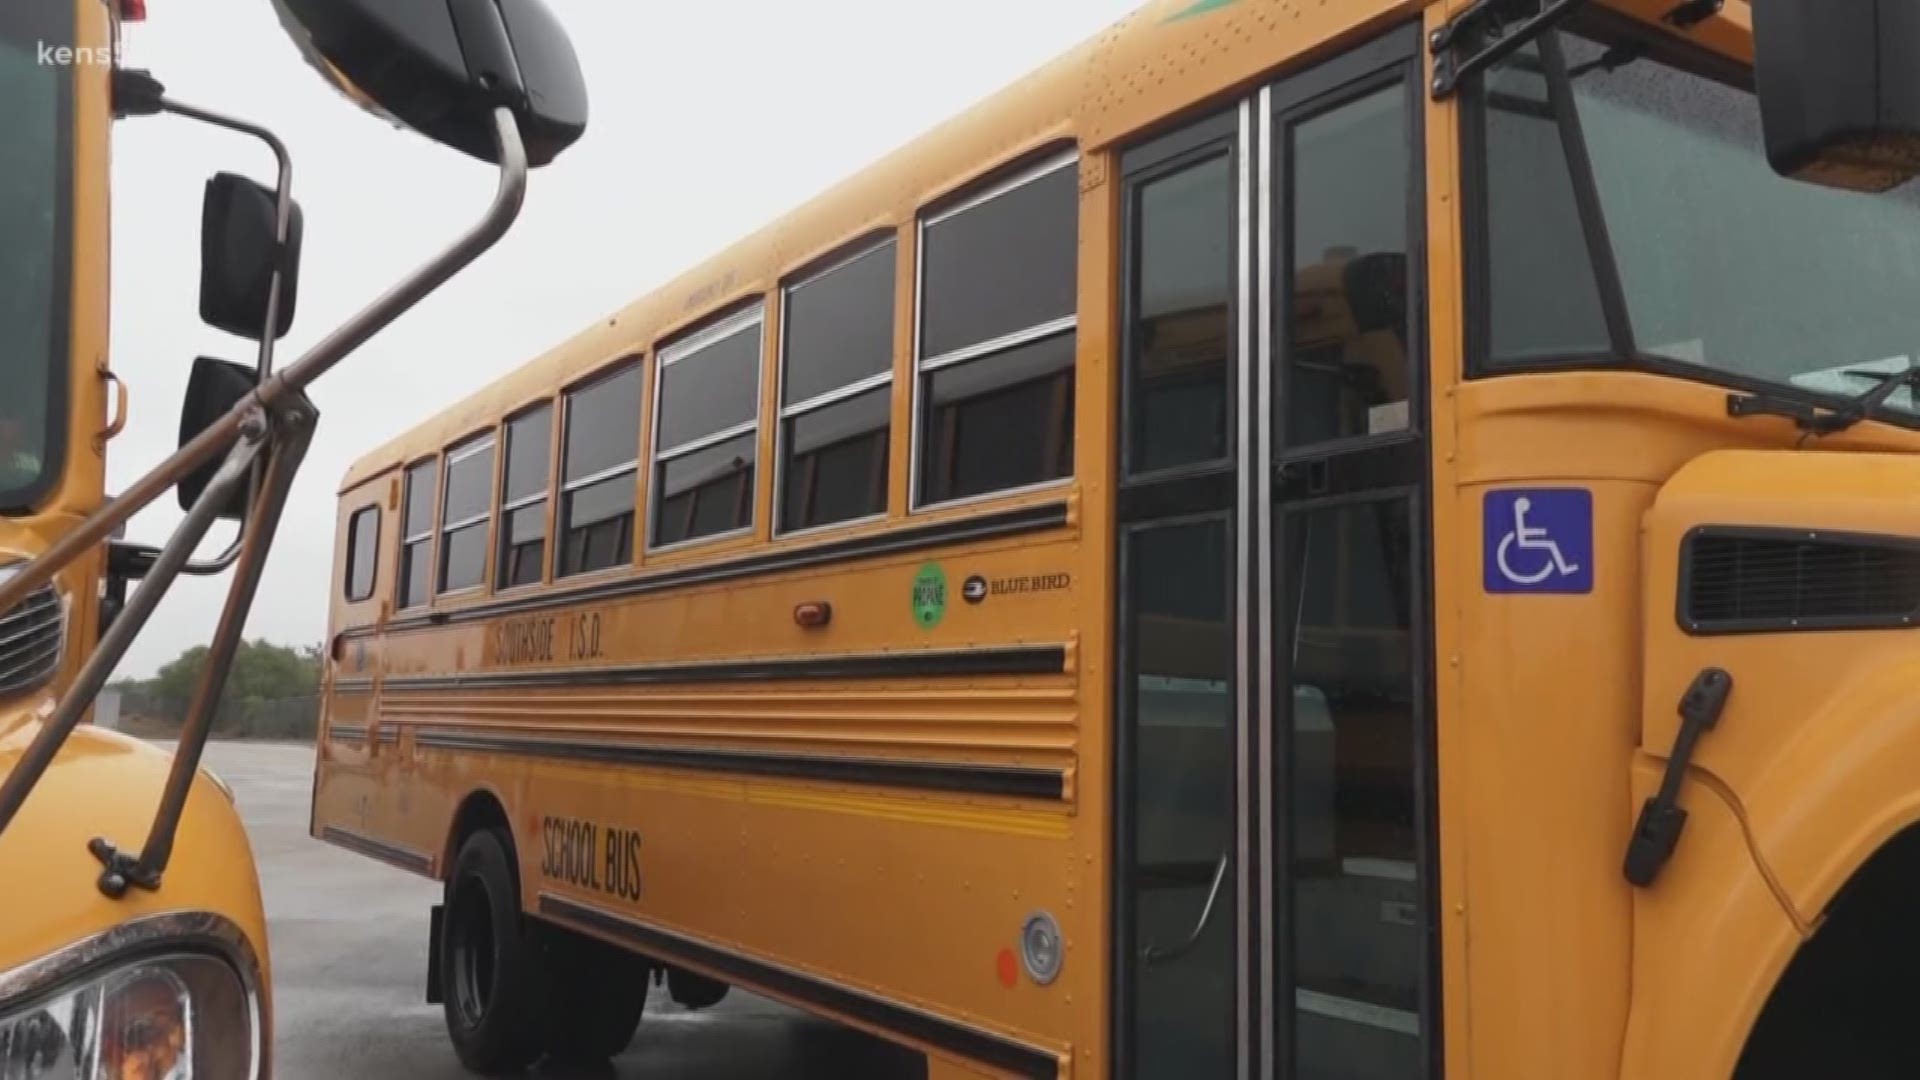 Officials with Southside Independent School District confirm that 21 buses have been affected by the recent school bus seat recall.